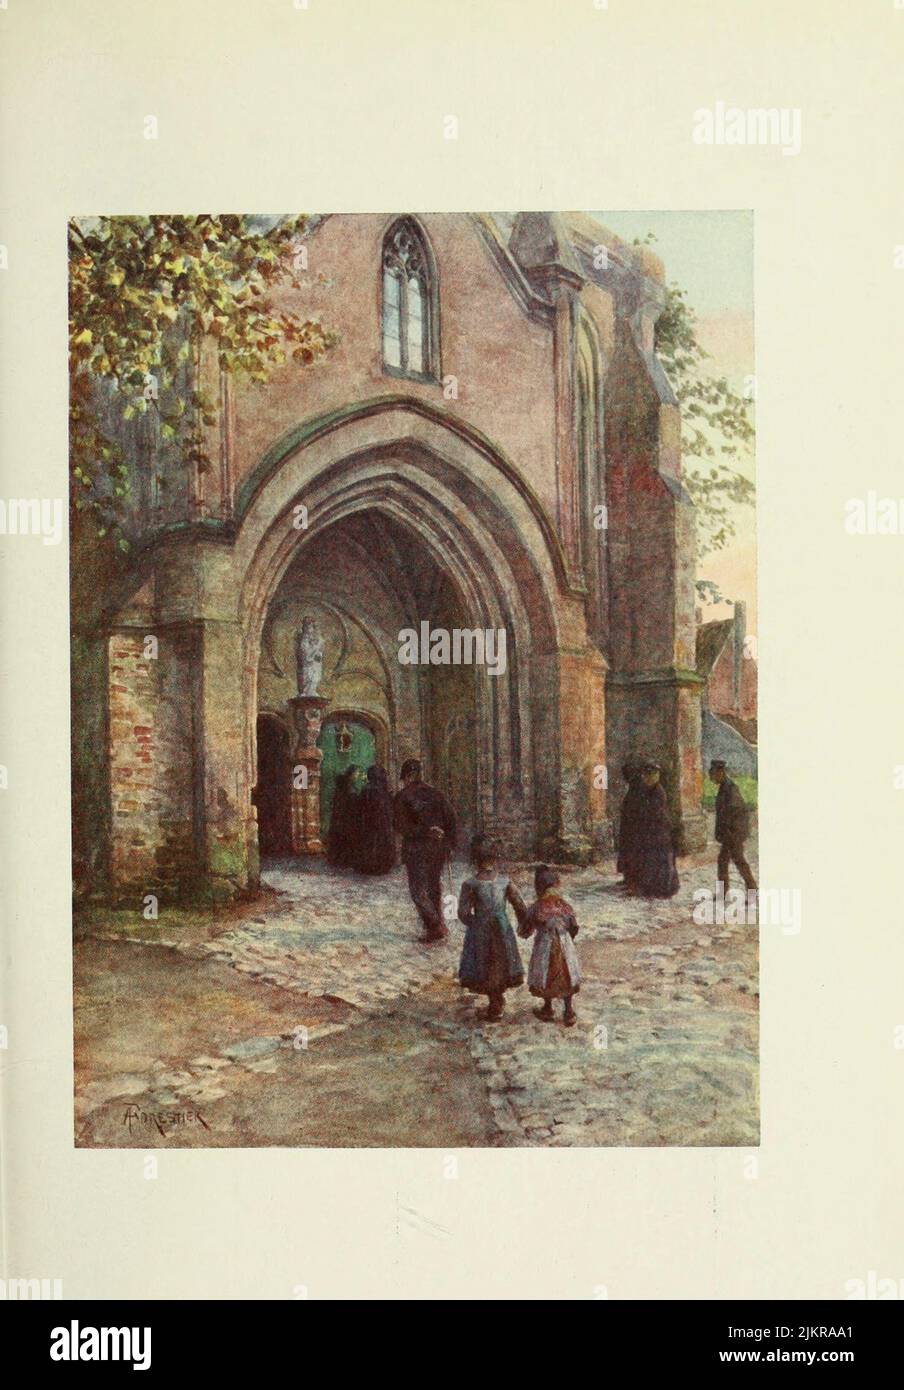 Nieuport Church Porch (Evensong) Painted by Amedee Forestier, from the book '  Bruges and West Flanders ' by George William Thomson Omond, Publication date 1906 Publisher London : A. & C. Black Sir Amédée Forestier (Paris 1854 – 18 November 1930 London) was an Anglo-French artist and illustrator who specialised in historical and prehistoric scenes, and landscapes. Stock Photo